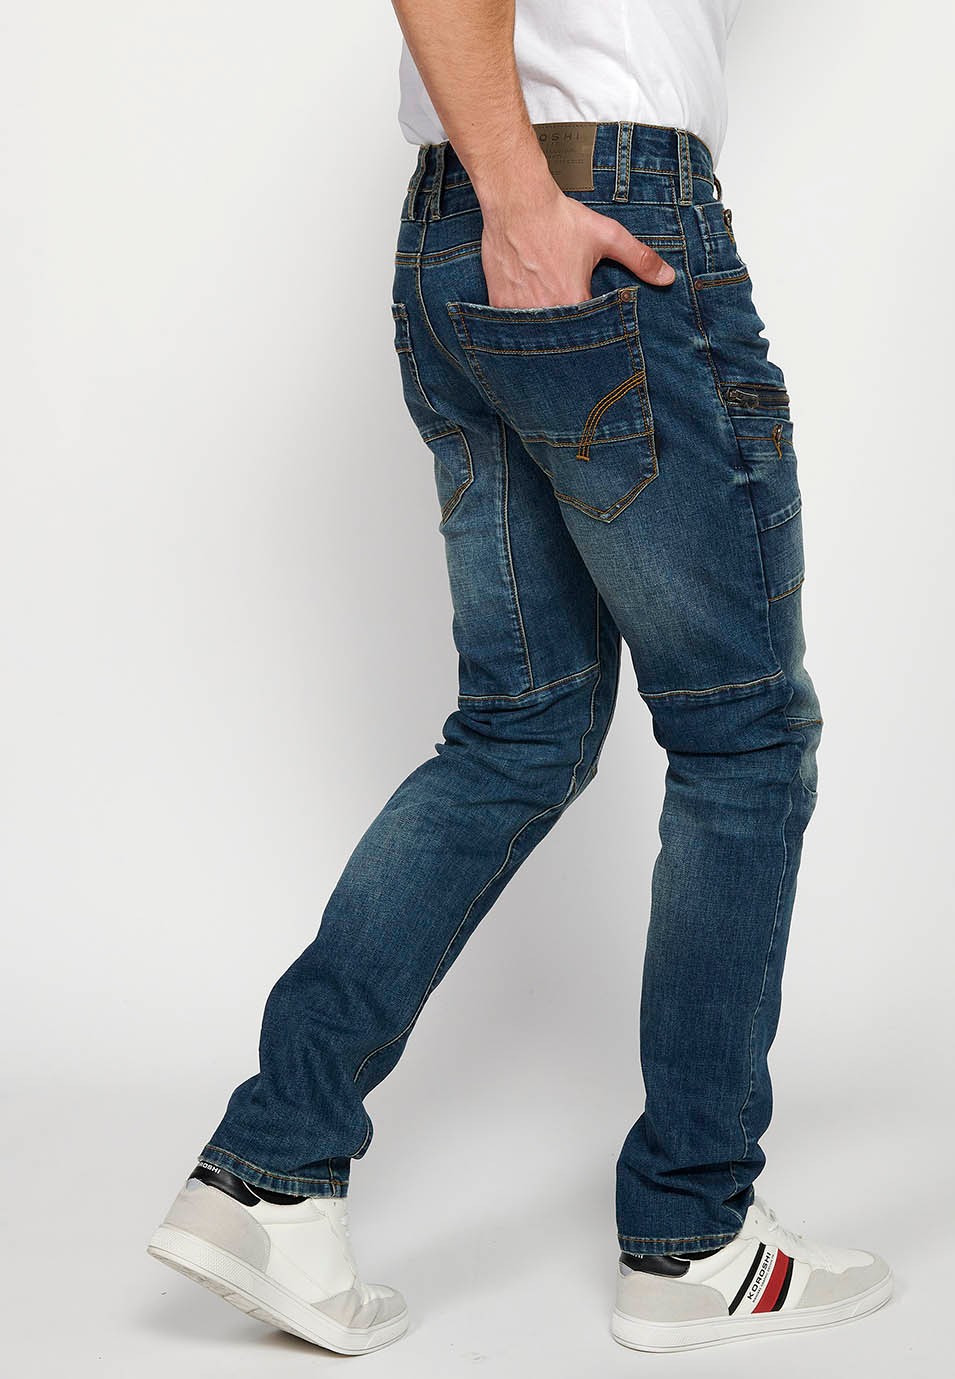 Regular fit workwear cargo denim pants with front zipper and button closure with side pockets with flap in Blue for Men